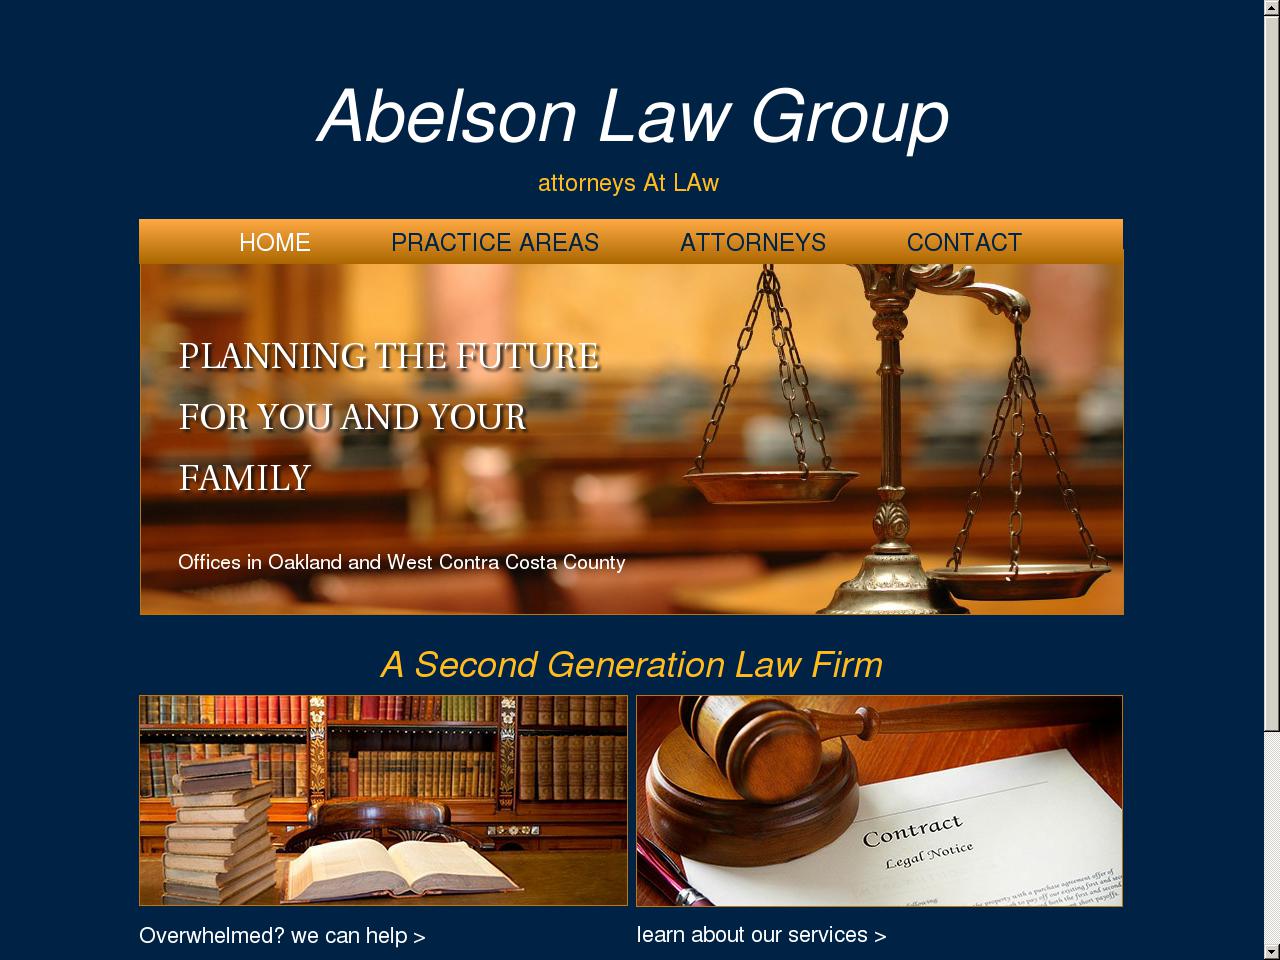 Abelson Law Group - San Pablo CA Lawyers